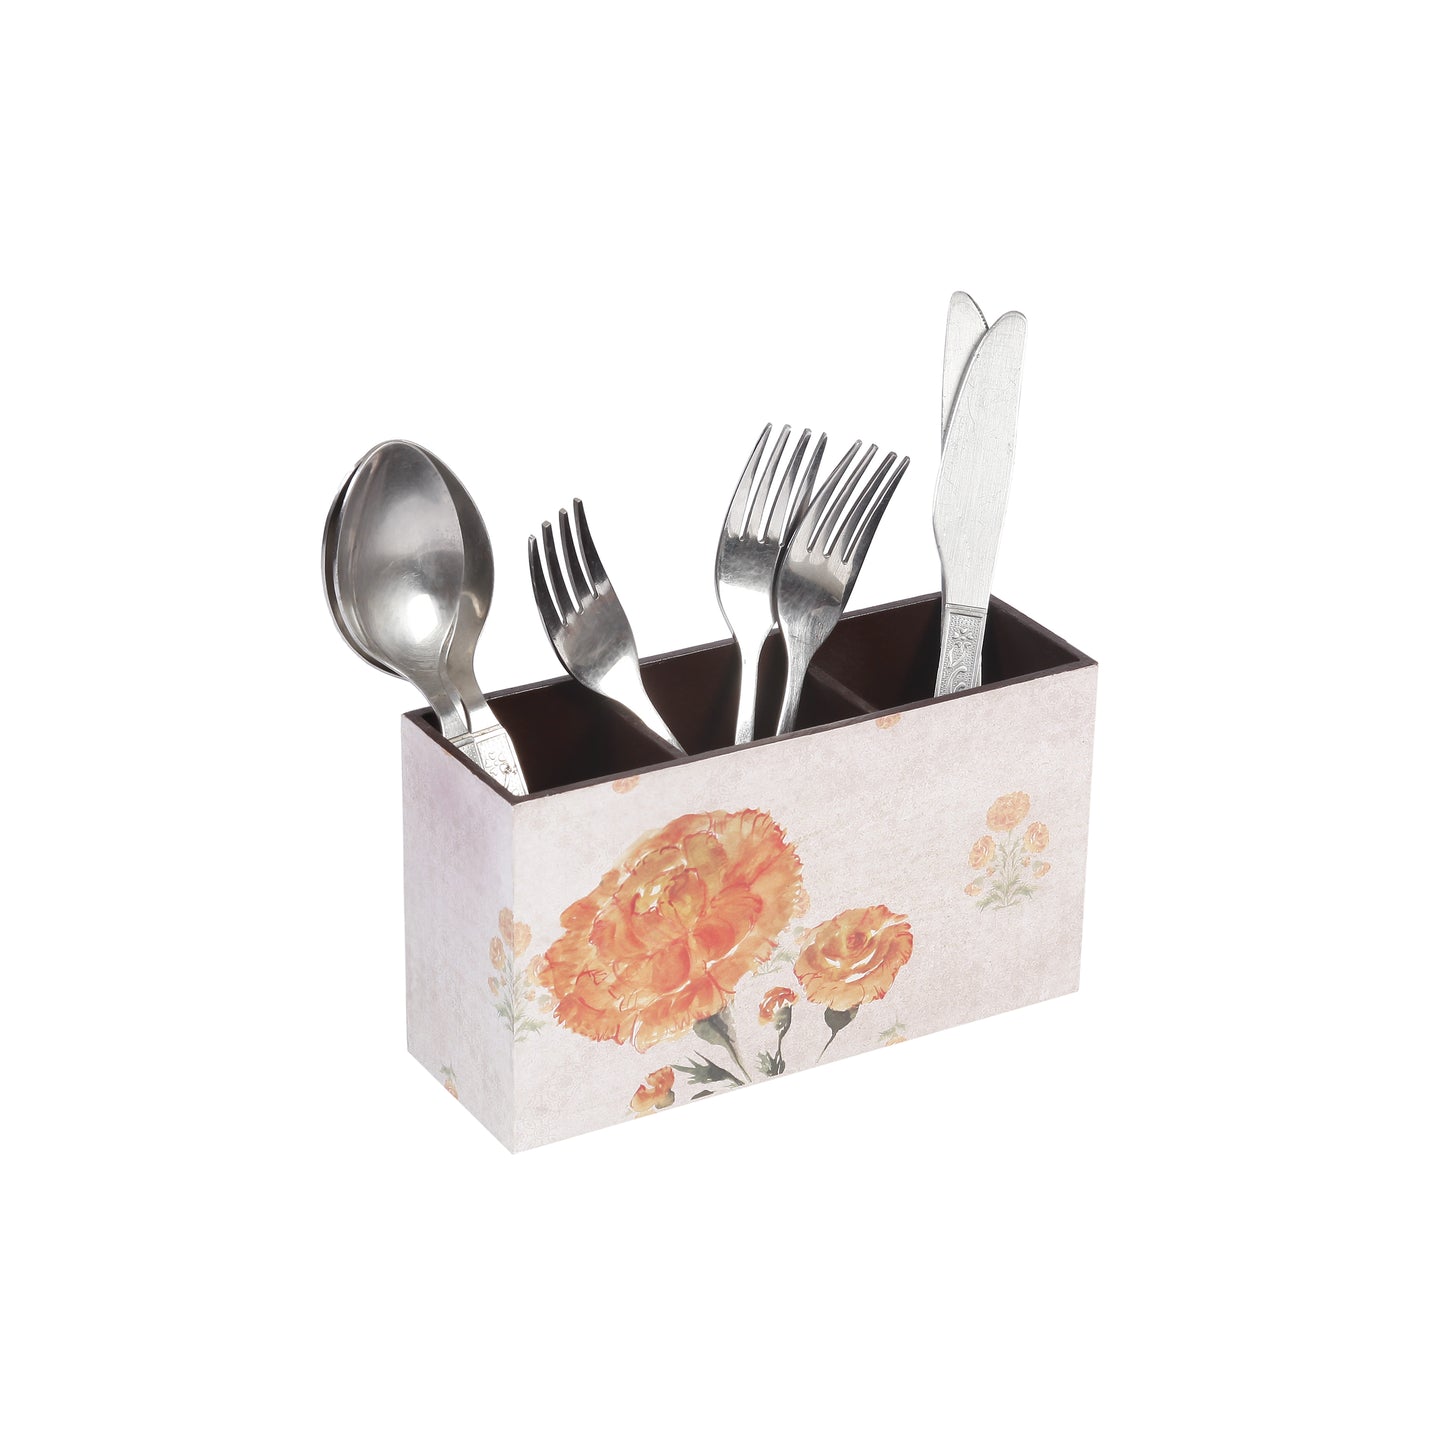 A Tiny Mistake Marigold Wooden Cutlery Holder, 18 x 10 x 6.5 cm